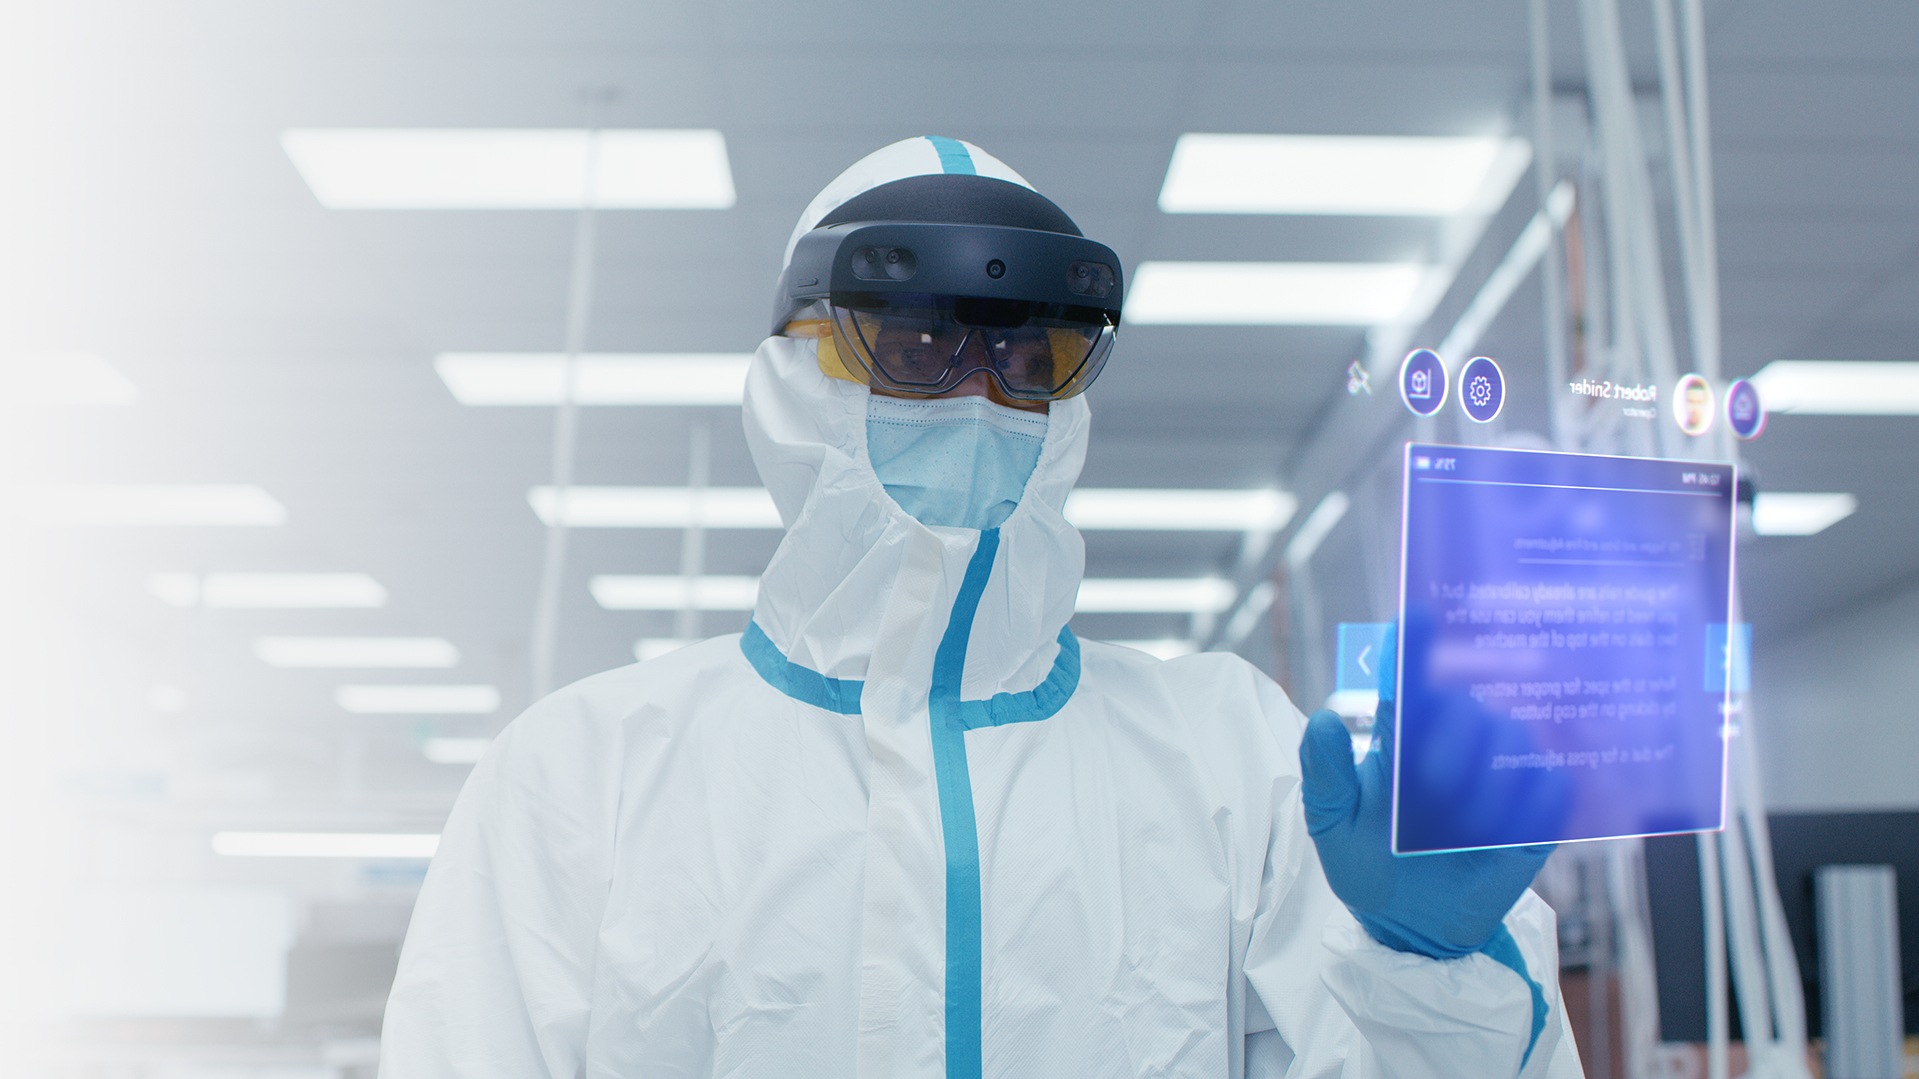 Person in a hazmat suit wearing HoloLens 2 Industrial Edition device.